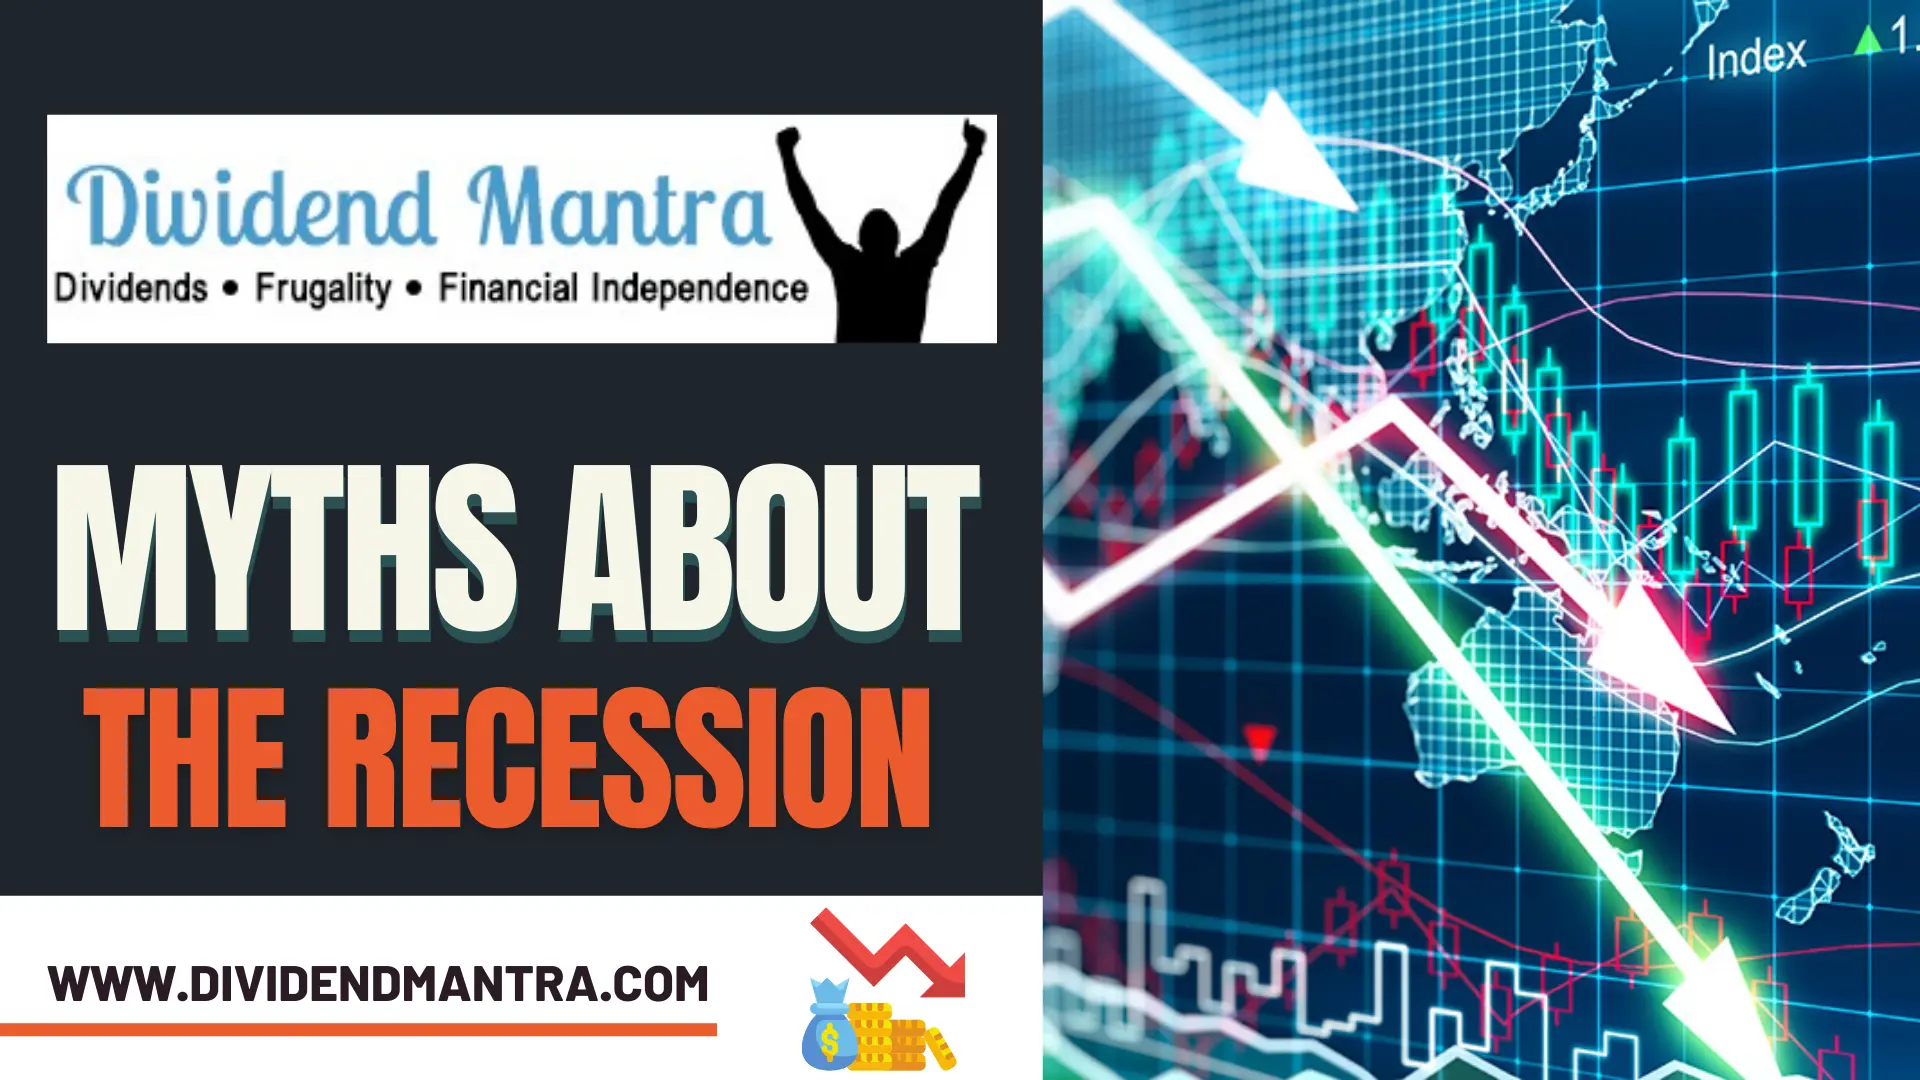 The Top 5 Myths About the Recession